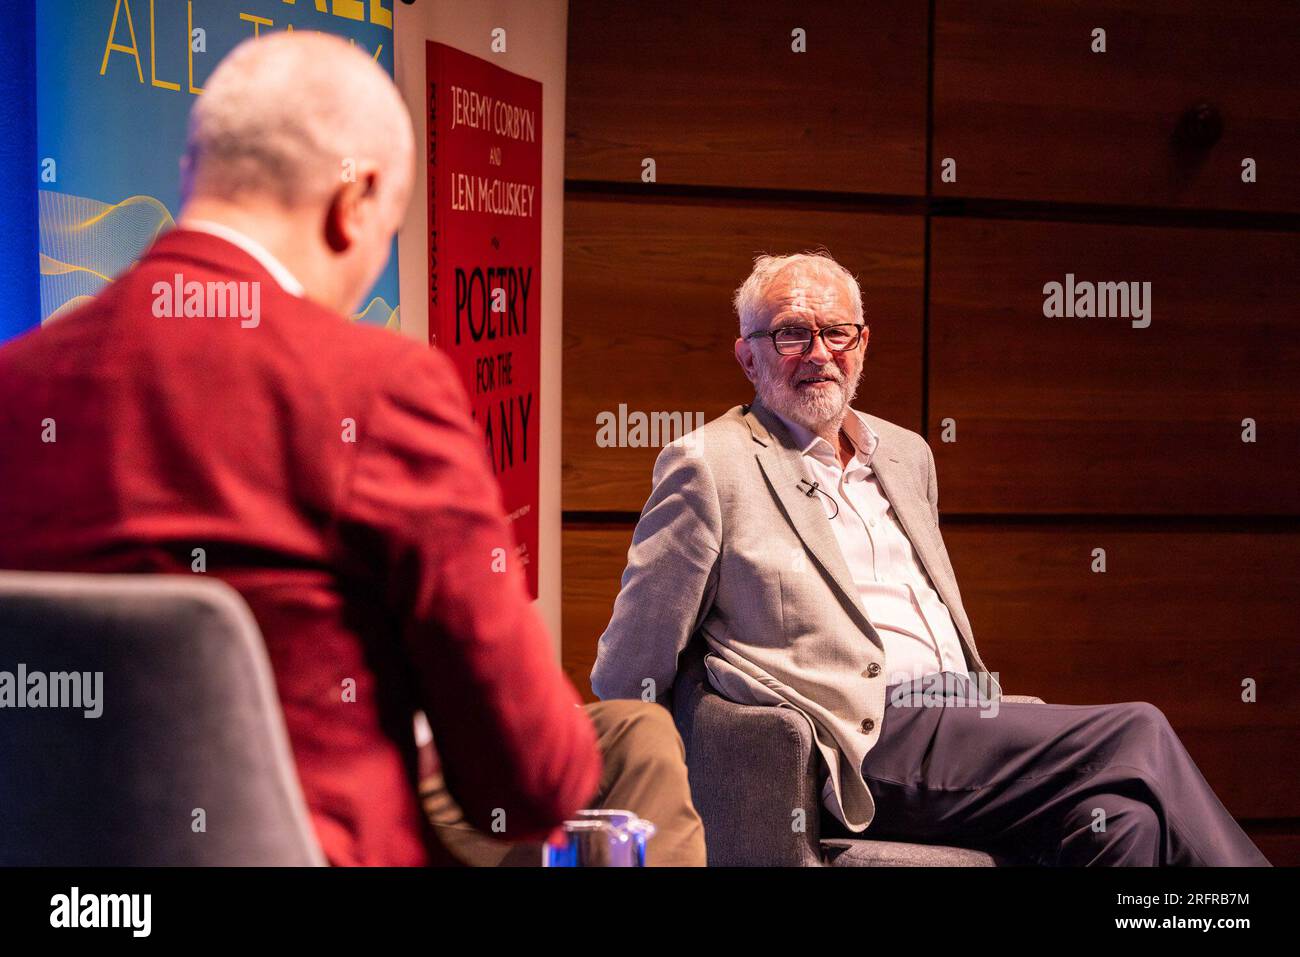 Edinburgh, United Kingdom. 05 August, 2023 Pictured: Iain Dale and Jeremy Corbyn. Former Labour leader Jeremy Corbyn MP and renowned trade unionist Len McCluskey are interviewed by LBC presenter Iain Dale at the Edinburgh Fringe. During the interview McCluskey accused Keir Starmer of reneging on an agreement to retain Corbyn in the Labour Party. Jeremy Corbyn was quizzed if he will stand as an independent candidate in his constituency and responded by saying ‘watch this space’. Credit: Rich Dyson/Alamy Live News Stock Photo